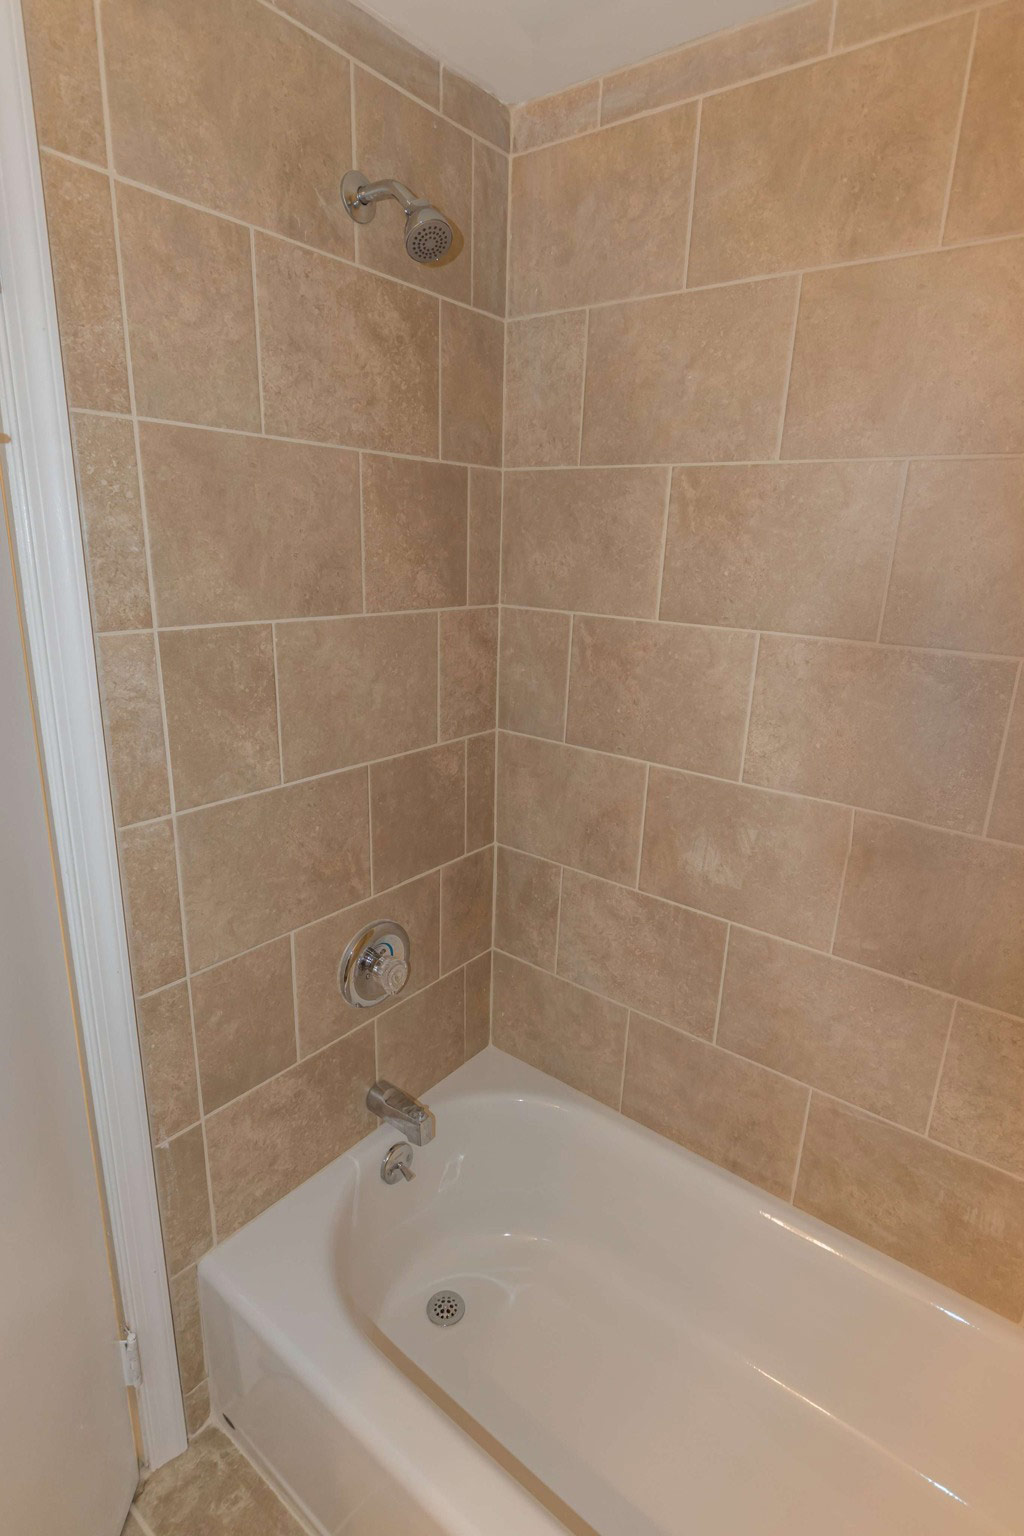 Rosetree Crossing Apartments sample bathroom tub and shower